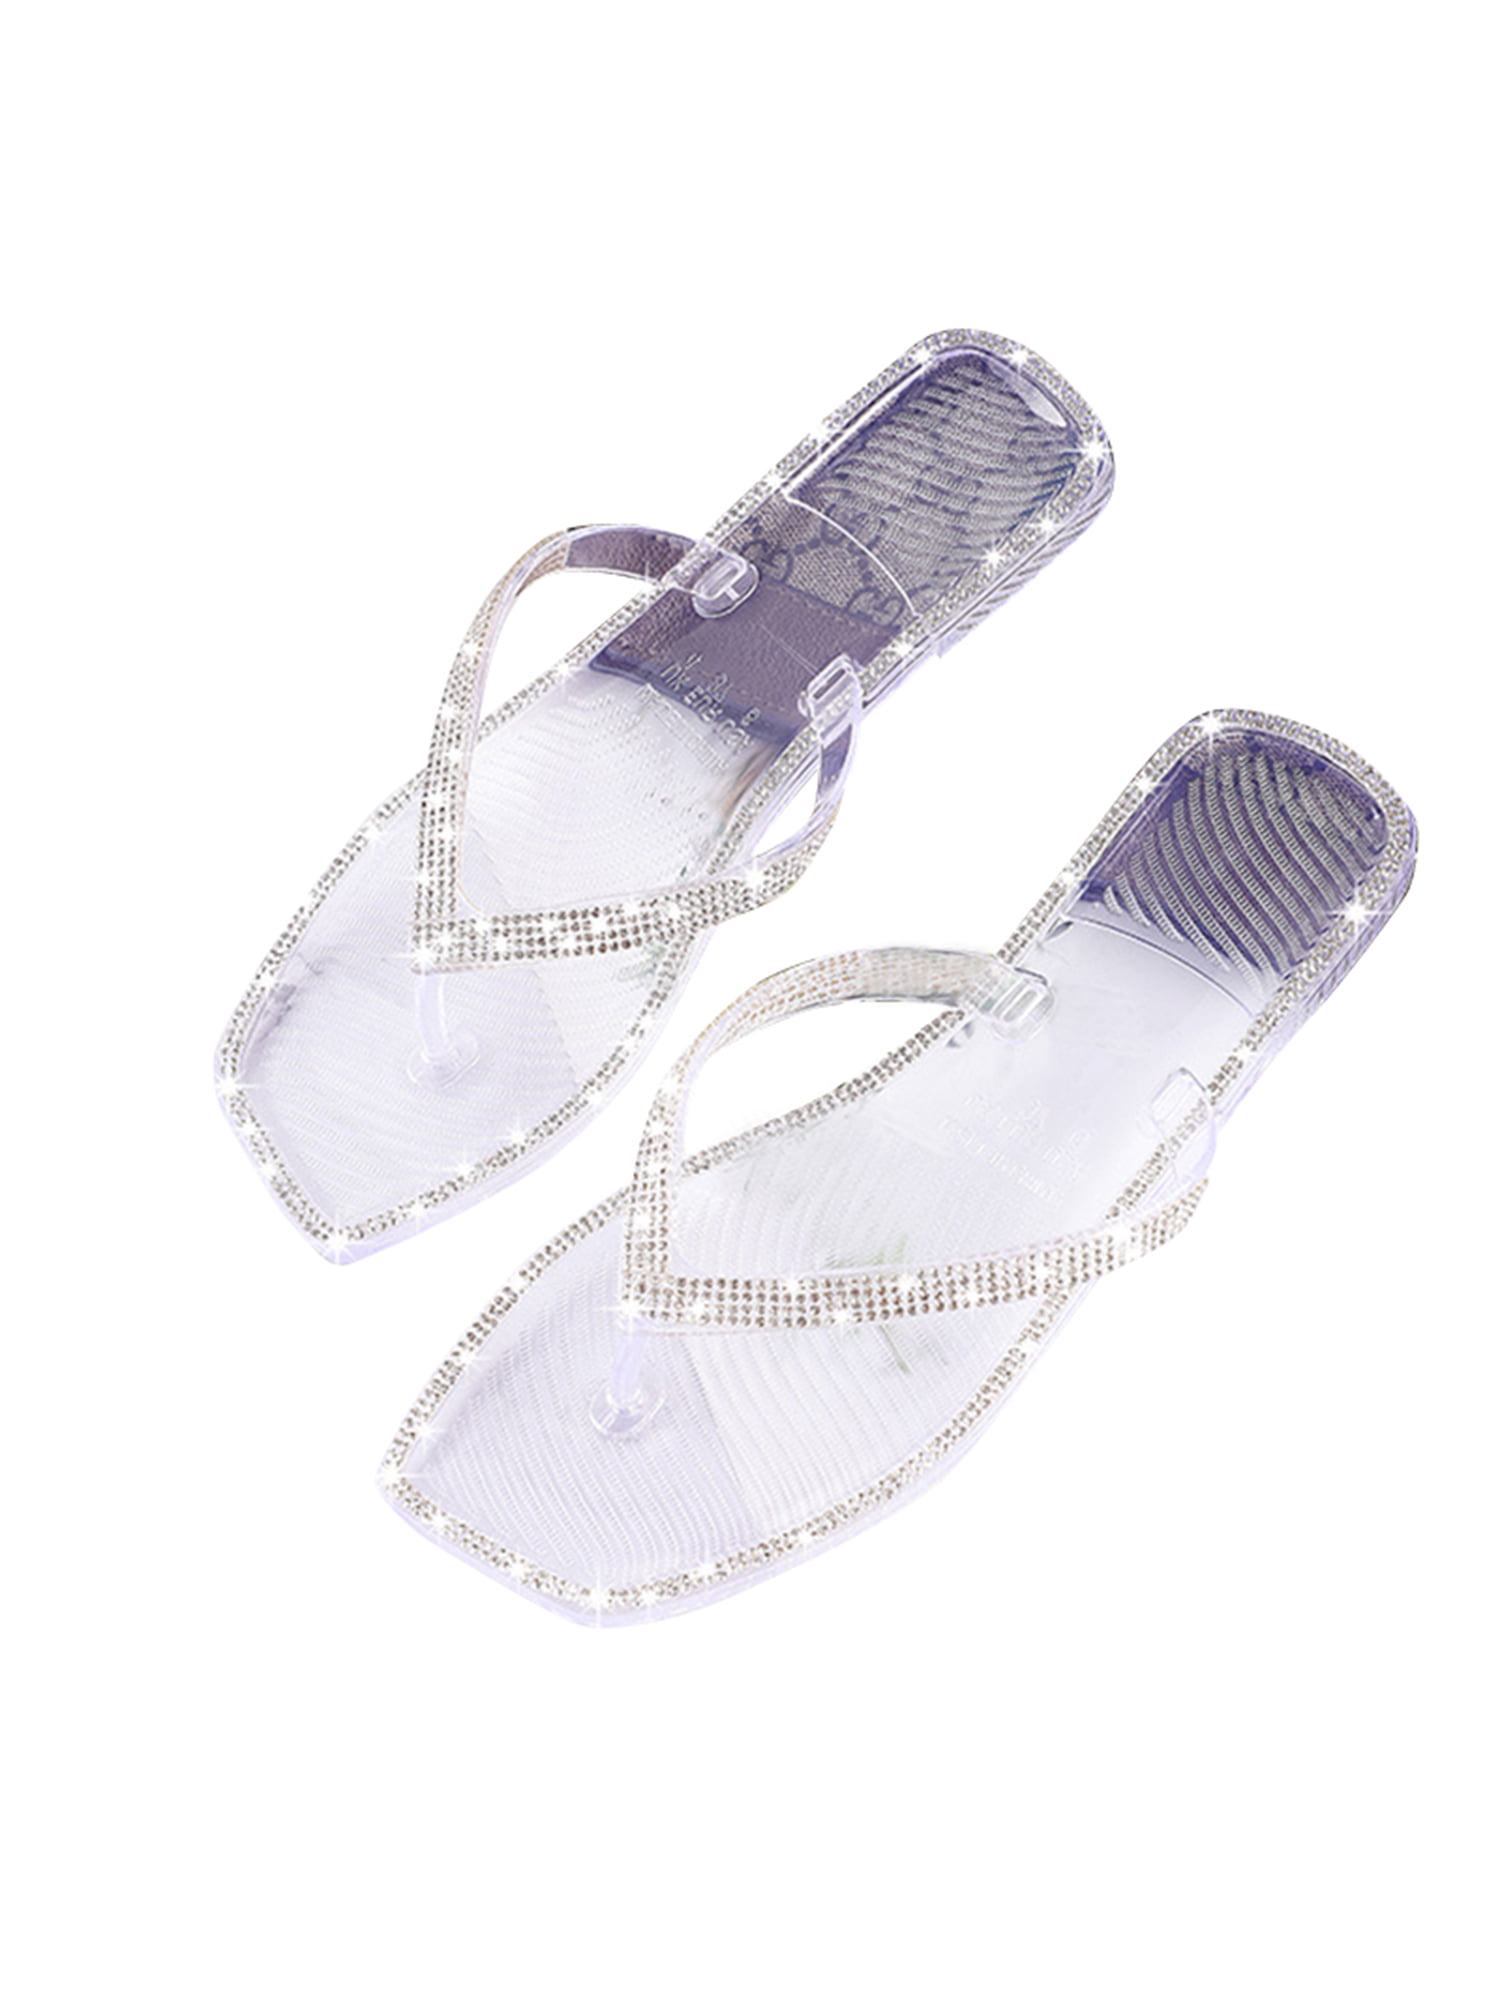 NEW WOMENS LADIES FLIP FLOPS JELLY BOW TOE POST FLAT SUMMER BEACH SANDALS SHOES